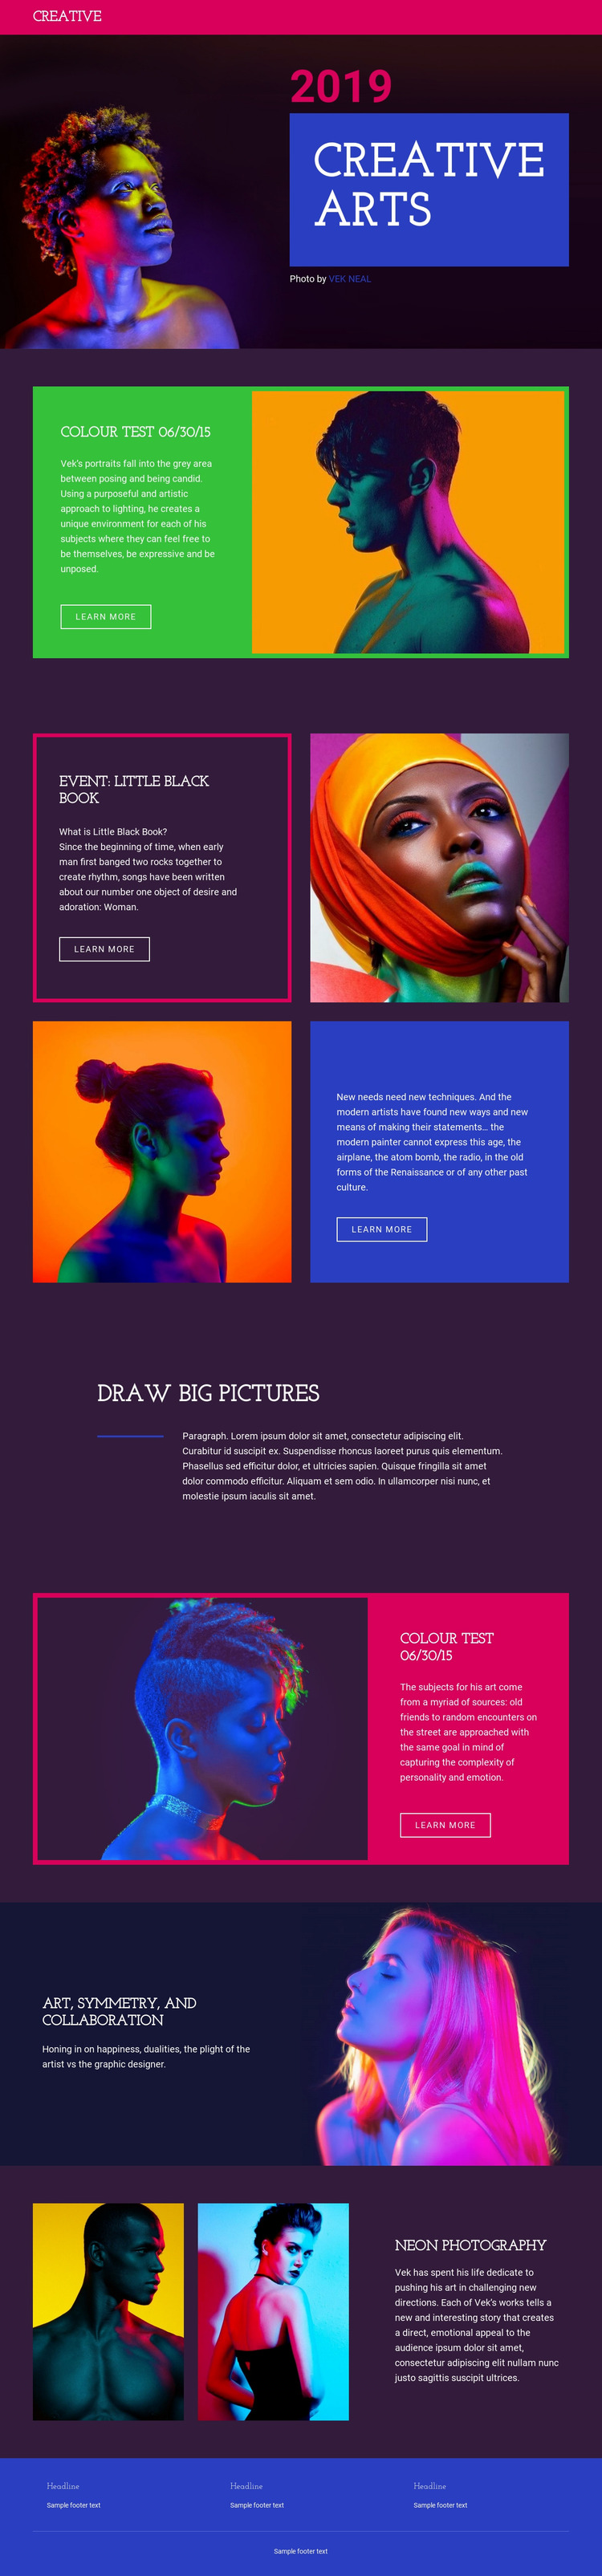 Limited-edition photography Html Website Builder